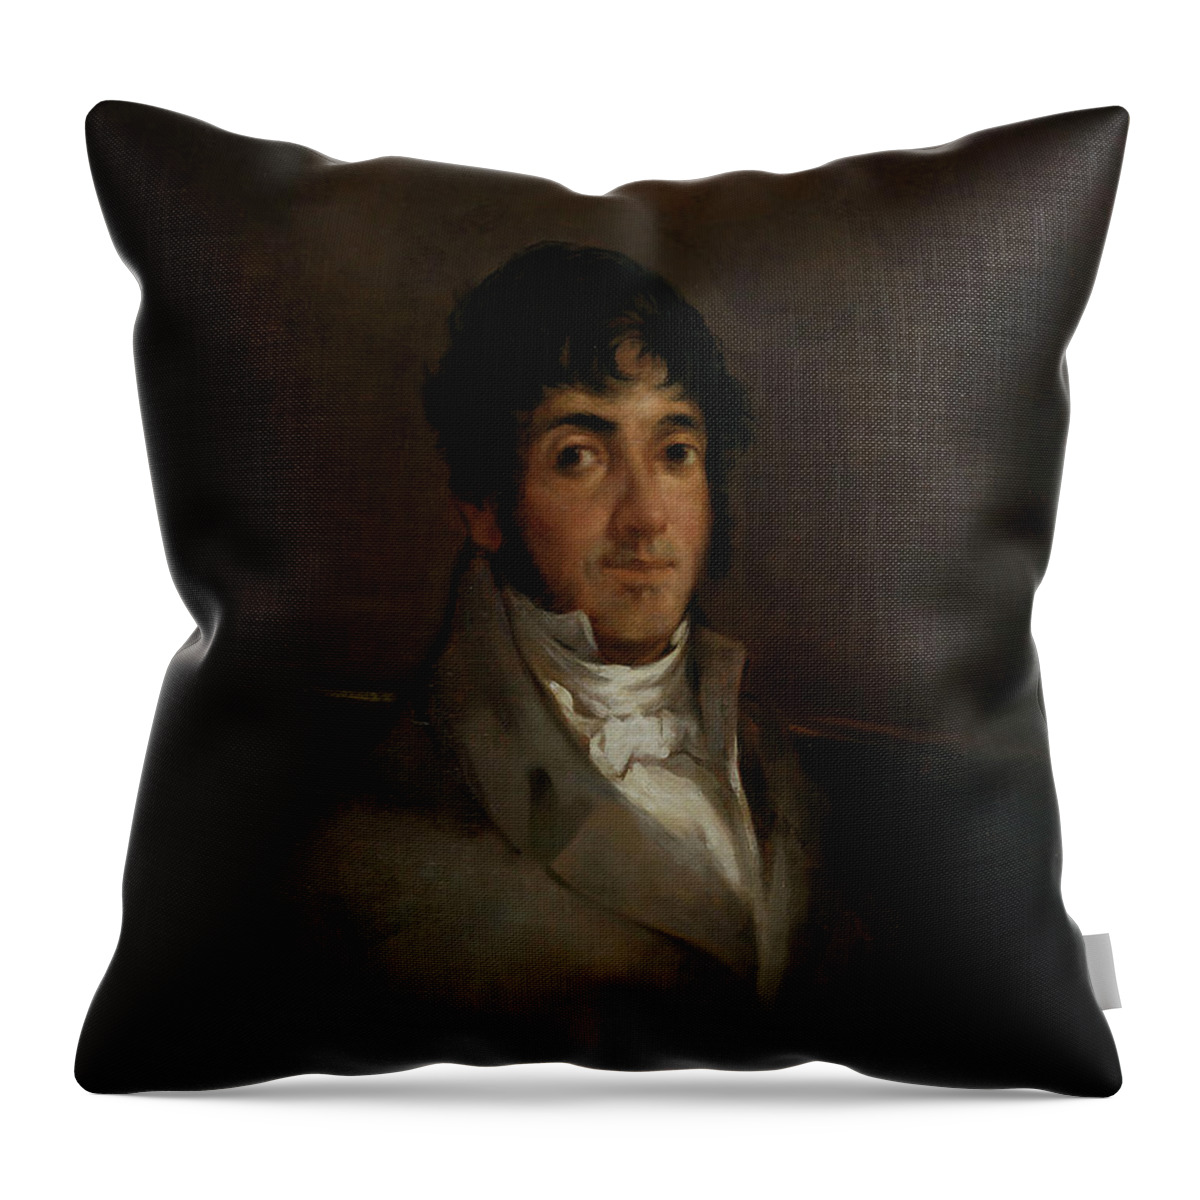 19th Century Art Throw Pillow featuring the painting Portrait of Isidoro Maiquez by Francisco Goya